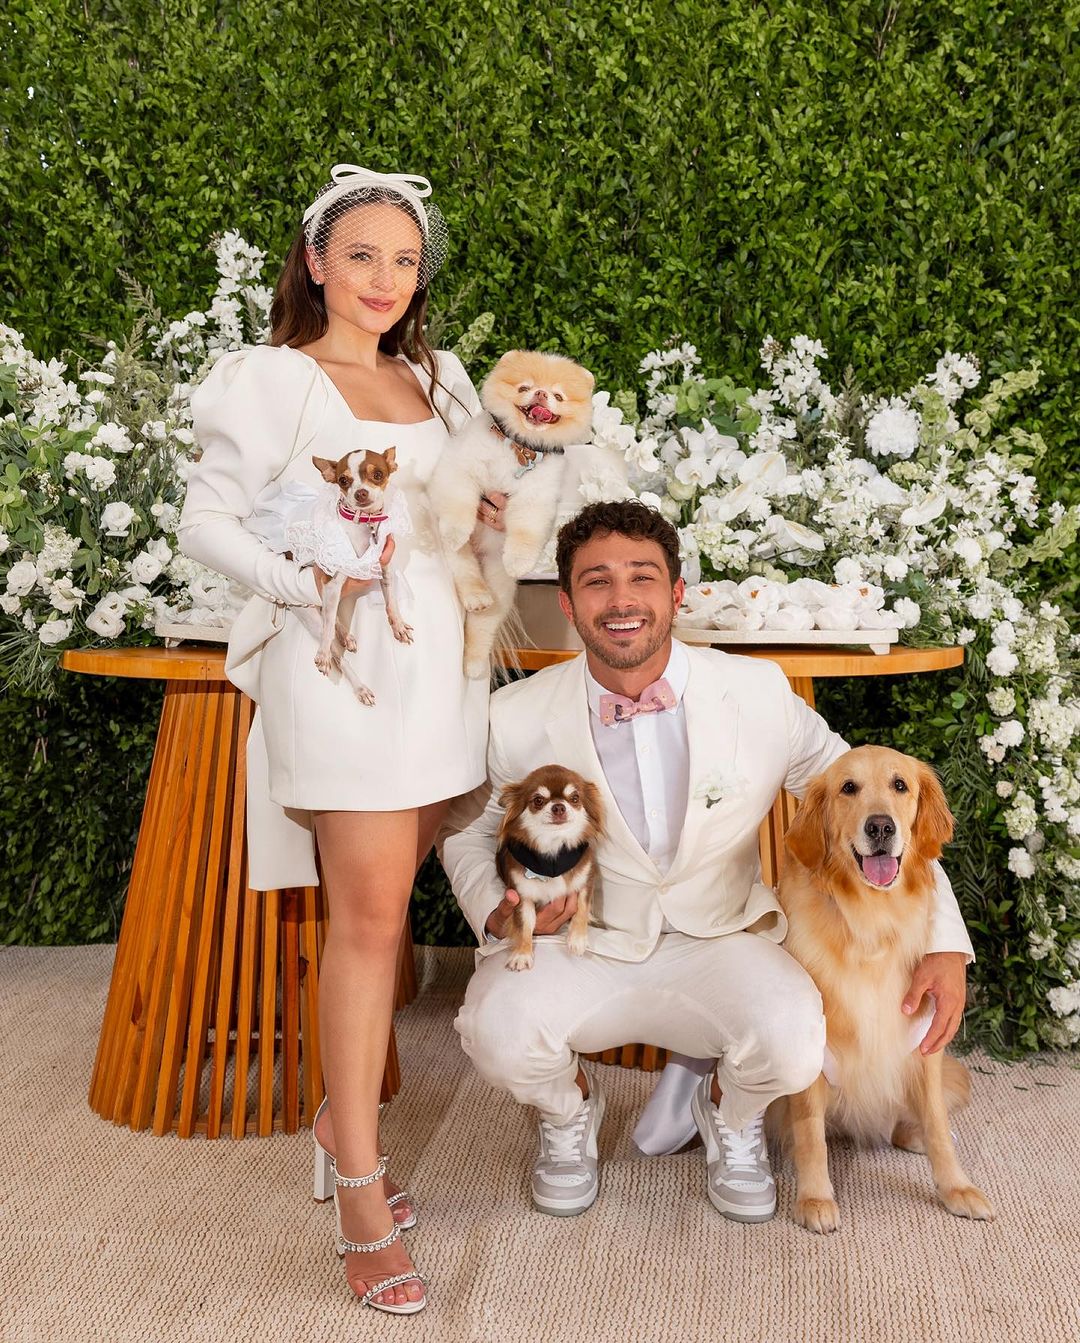 Larisa Manoela's dogs attend the wedding without their parents.